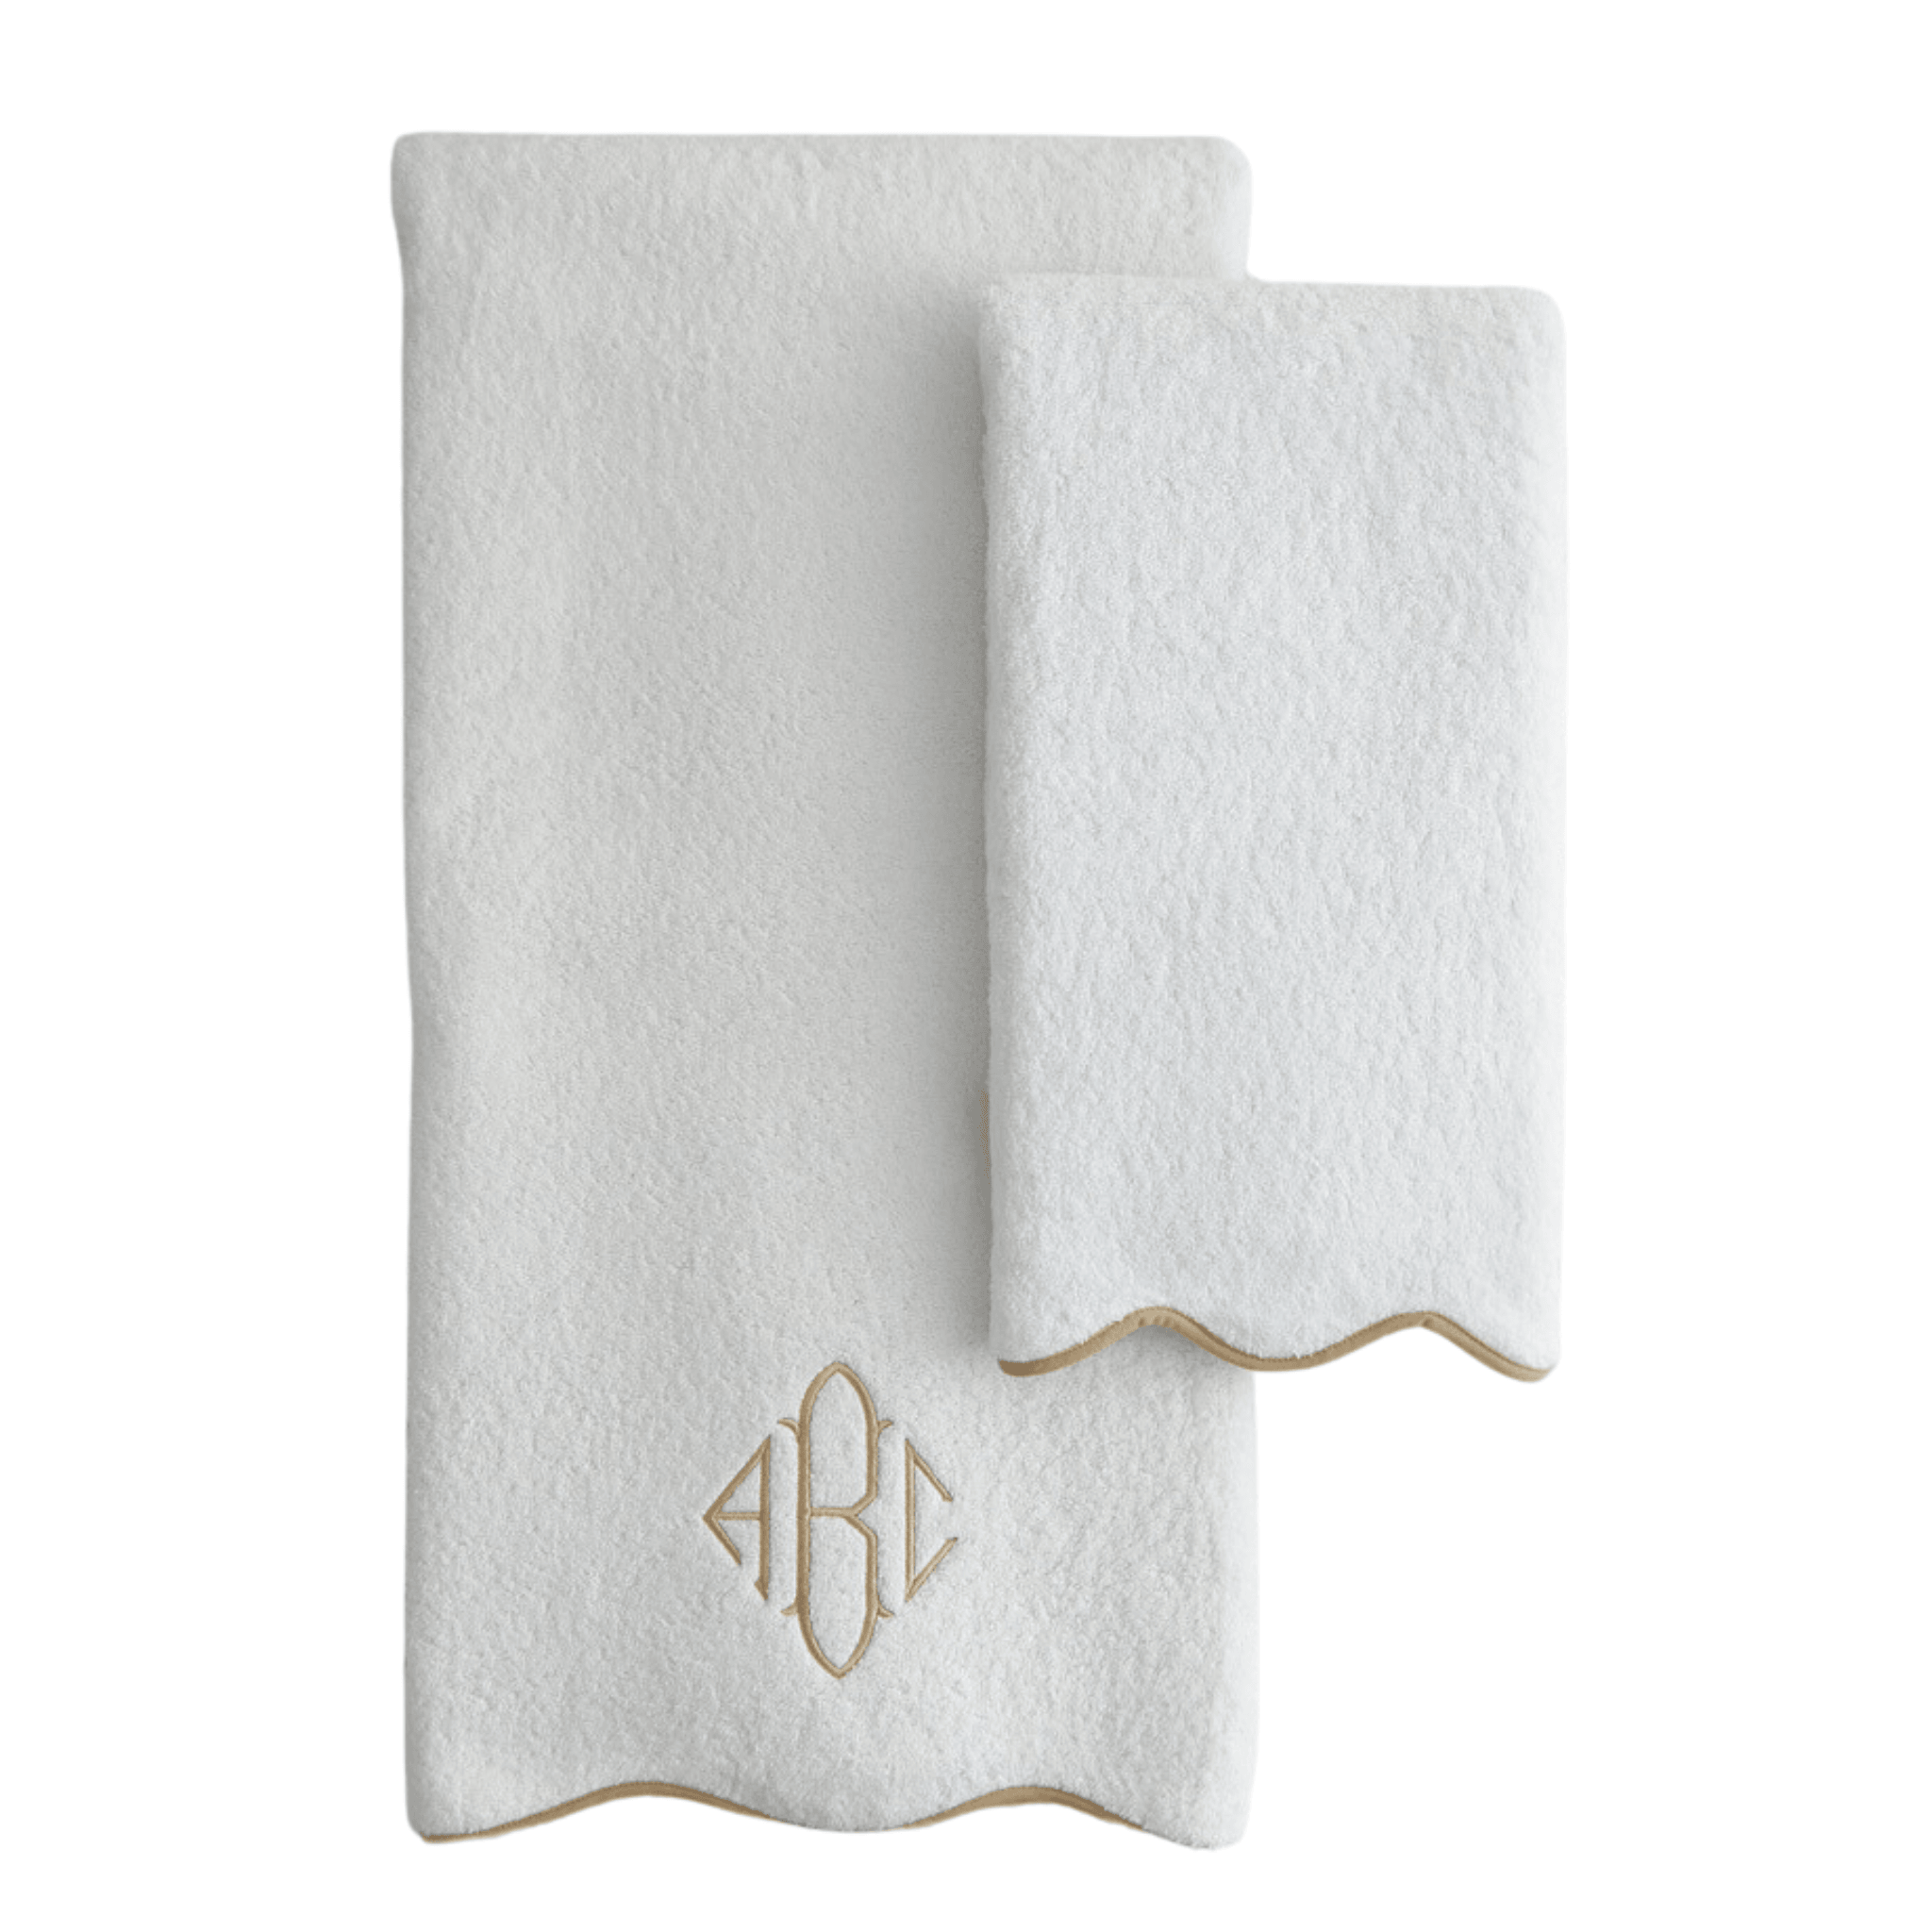 https://www.wellappointedhouse.com/cdn/shop/files/plush-devon-terry-scalloped-bath-towels-with-optional-monogram-available-in-a-variety-of-trim-colors-bath-towels-the-well-appointed-house-1_78989a6a-1e47-4a5e-926c-f0bb1b30b51e.png?v=1691670496